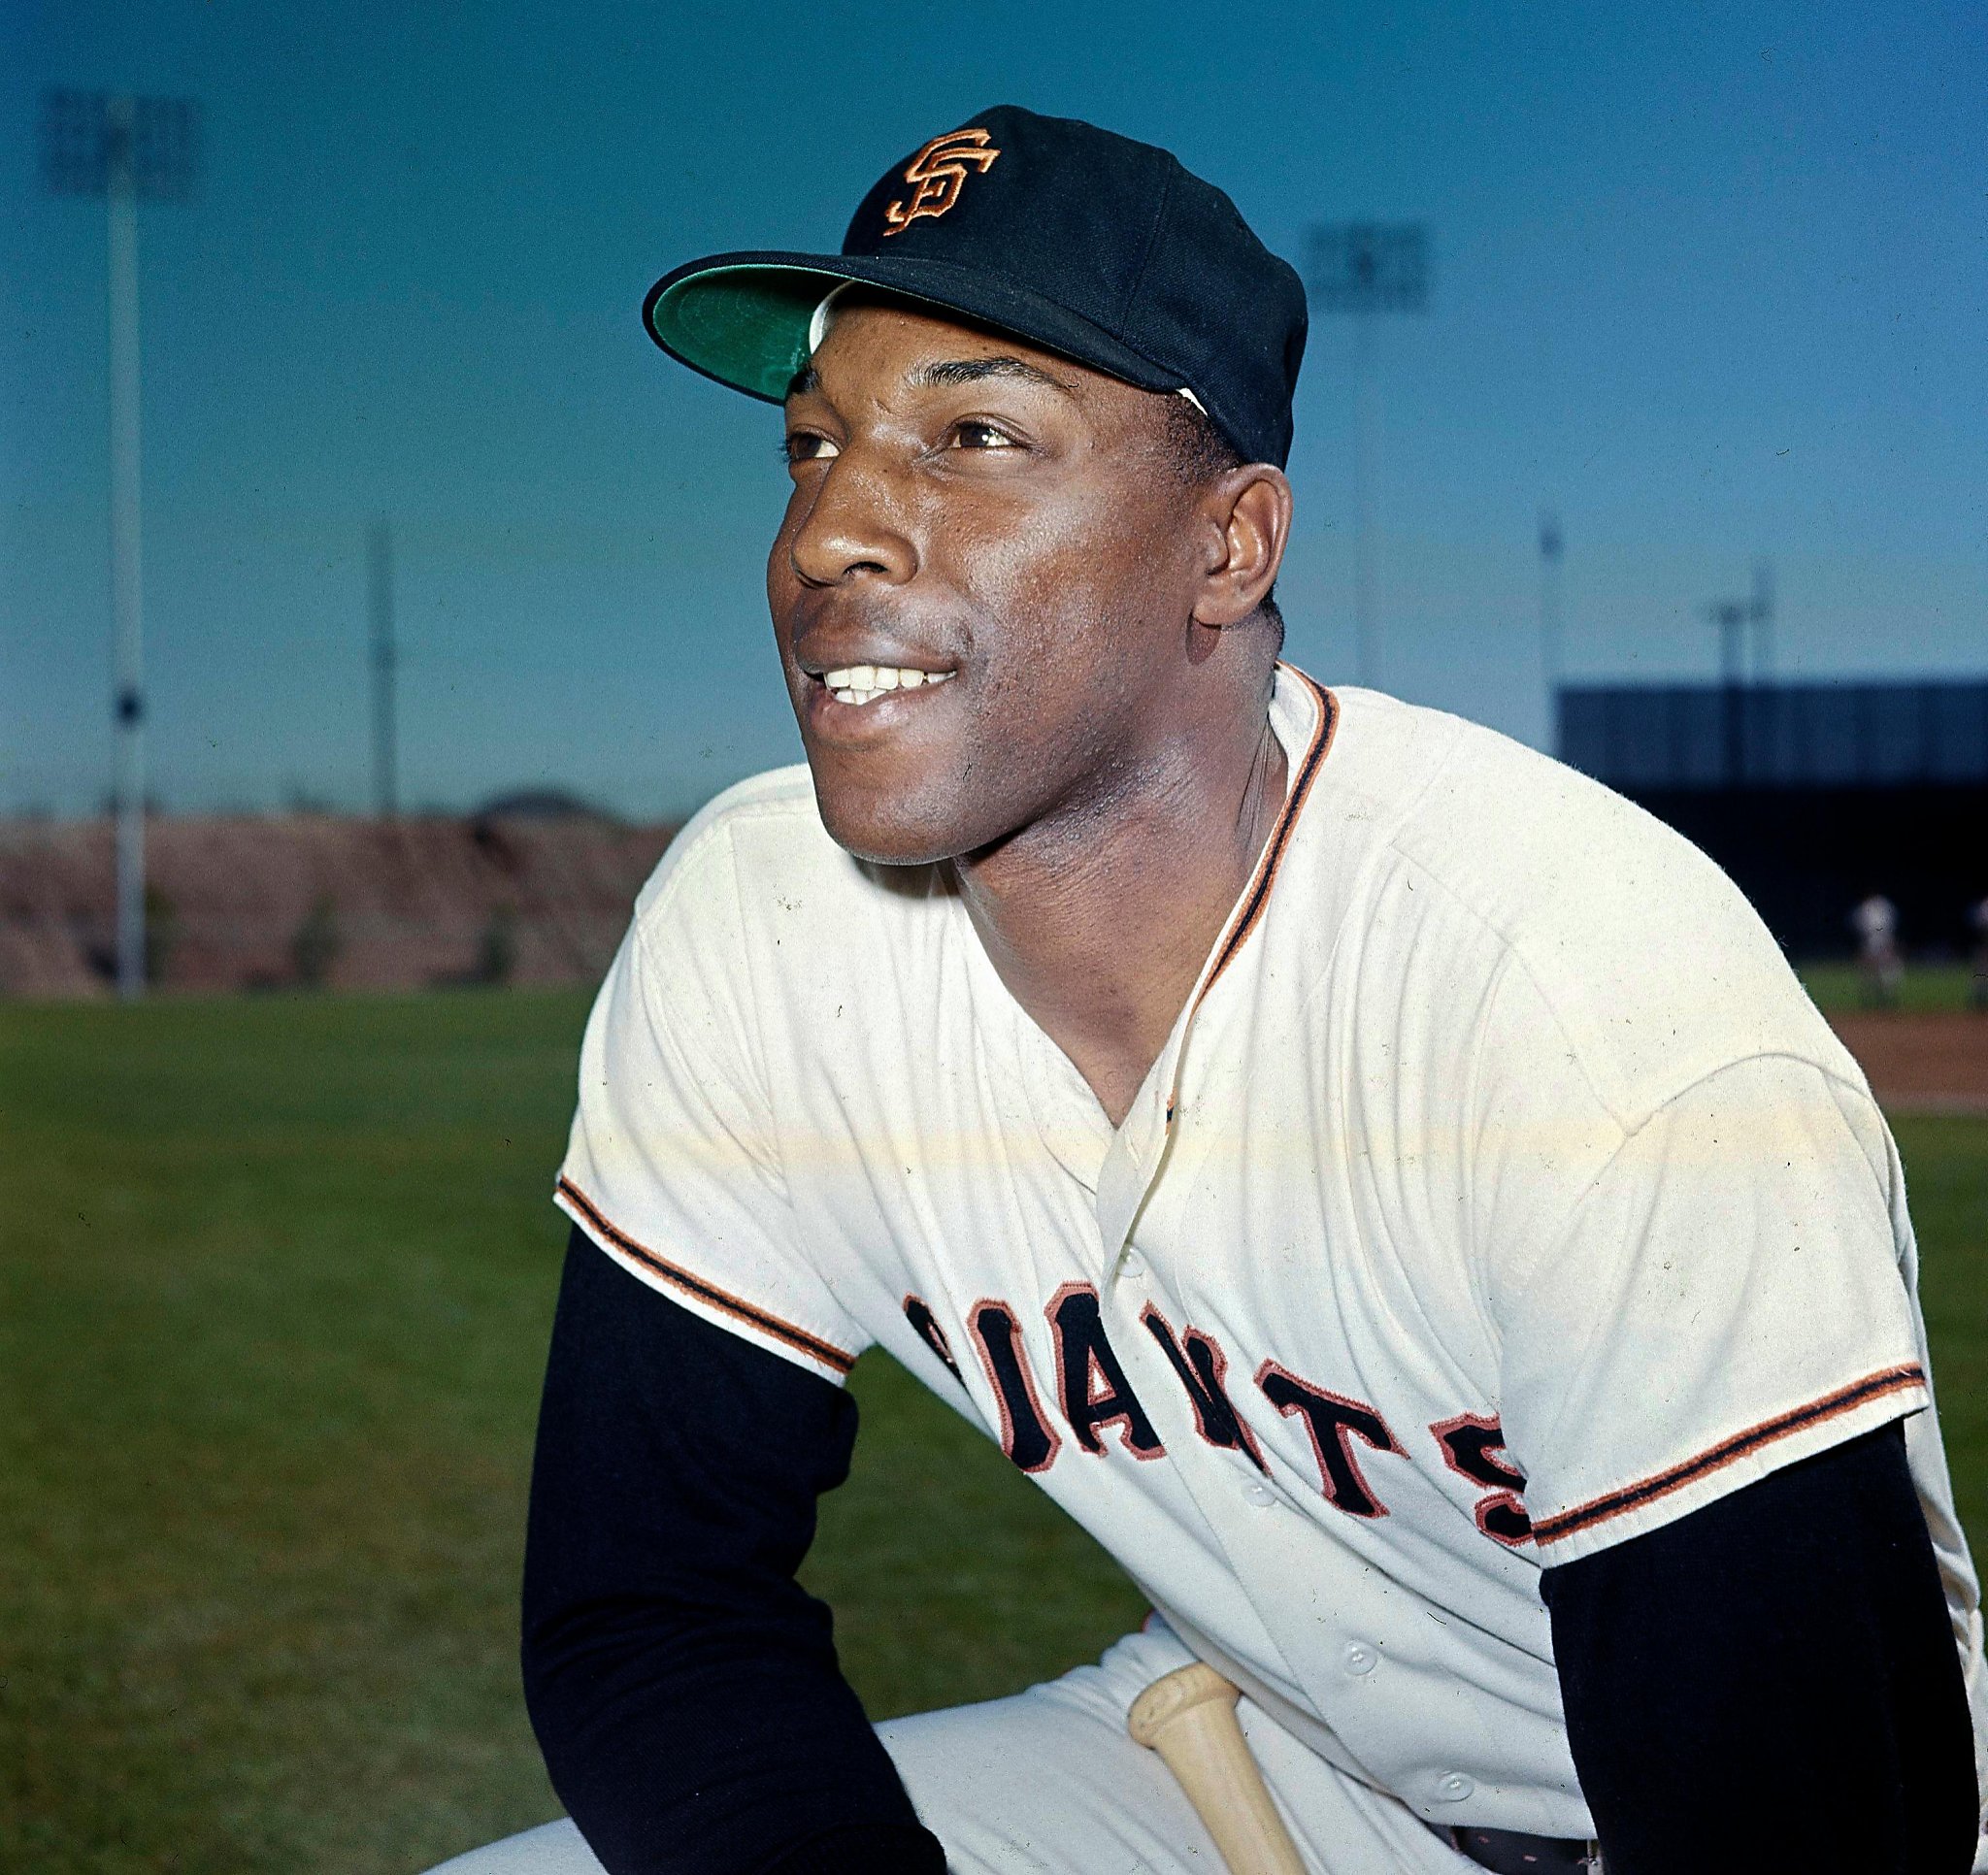 Remembered encounters with Willie McCovey